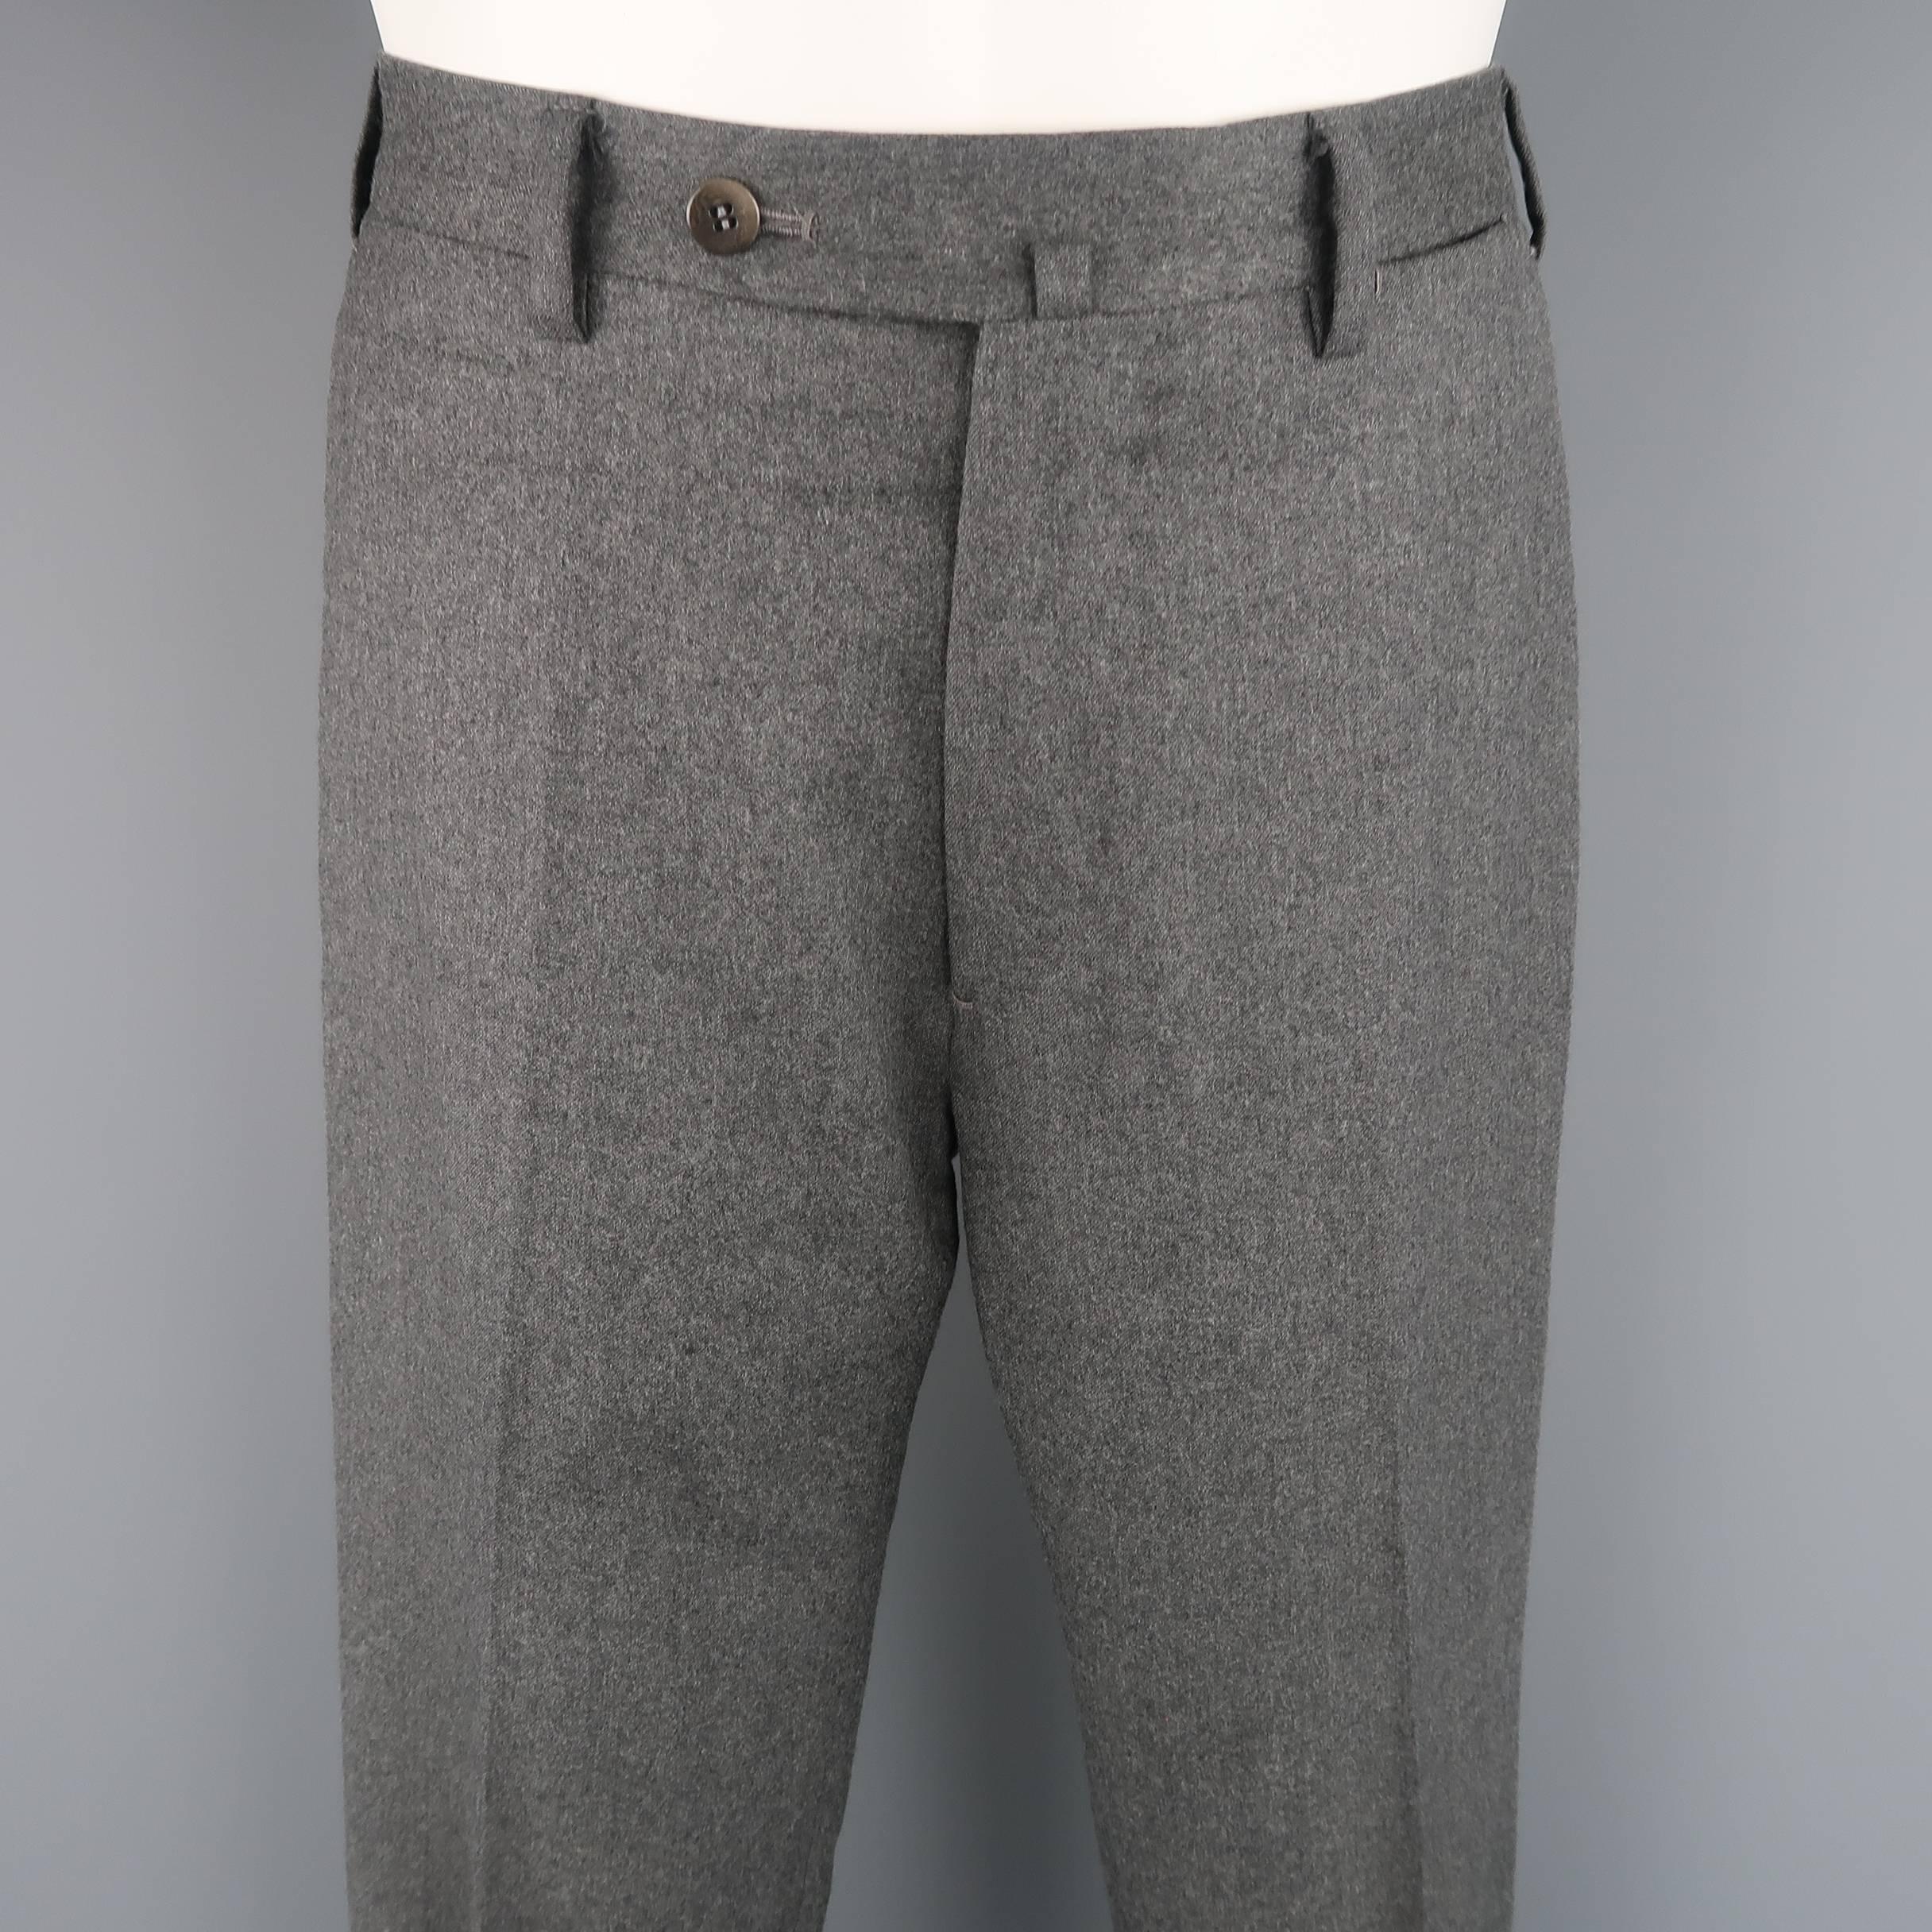 Classic BORRELLI dress pants come in dark heather gray wool with a tapered leg. Made in Italy.
 
Good Pre-Owned Condition.
Marked: IT 48
 
Measurements:
 
Waist: 32 in. (+2 in.)
Rise: 10.5 in.
Inseam: 32 in. (+1.5 in.)
 
(Let Out Room)
